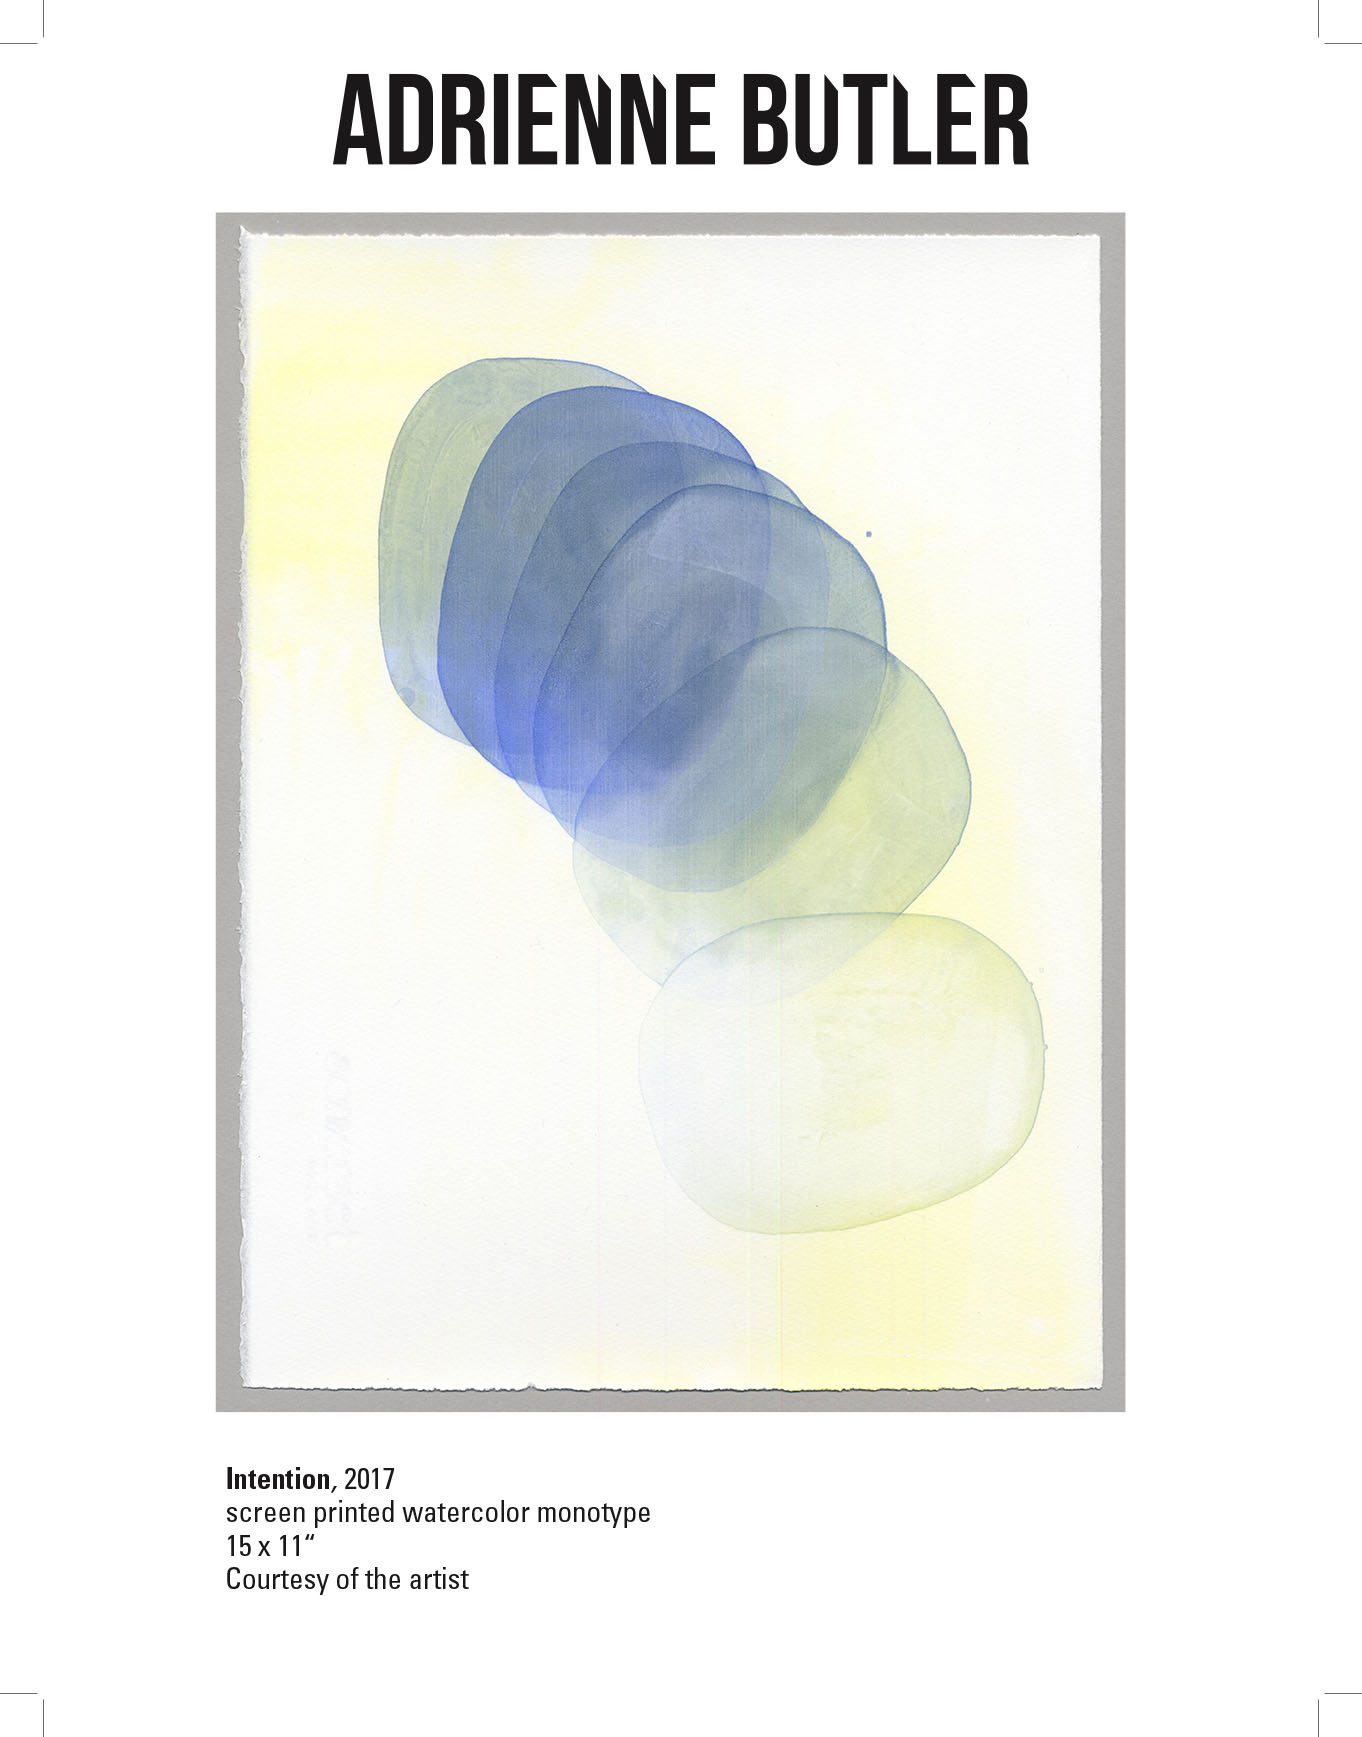 Adrienne Butler, Intention, 2017. Screen printed watercolor monotype. 15 x 11" Courtesy of the artist. Oval shaped overlapped onto each other changing color from blue to yellow